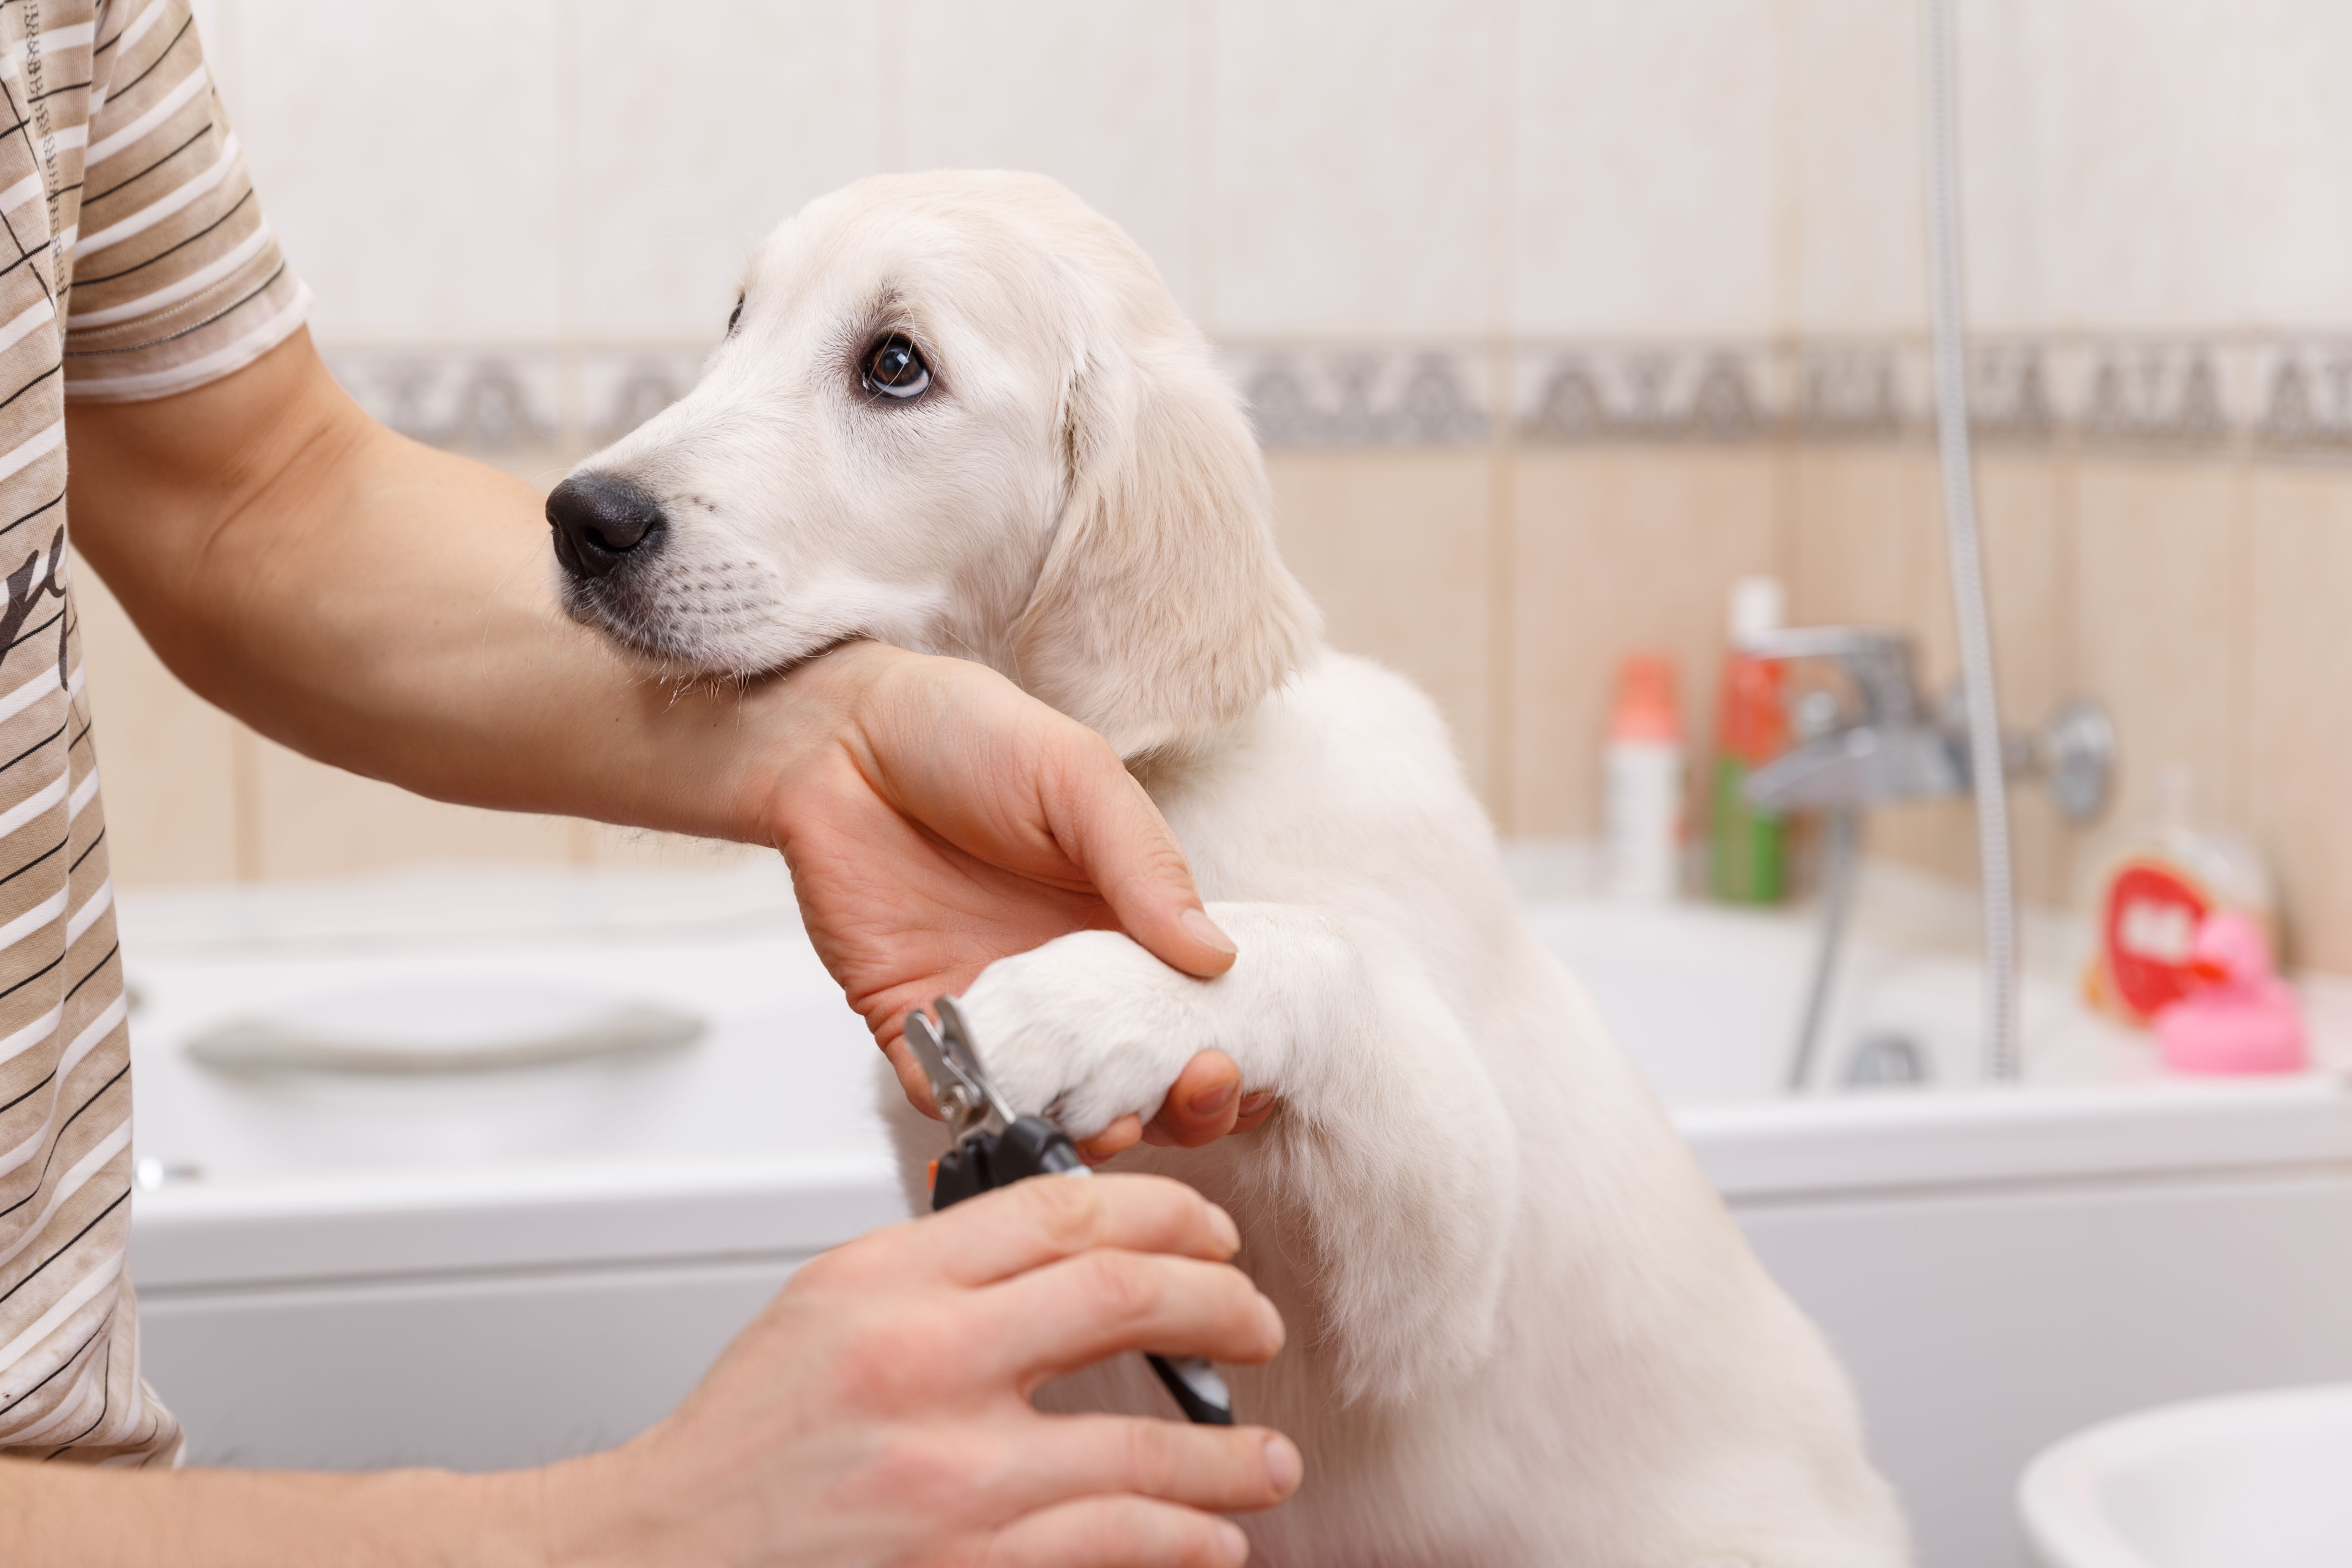 what is a good tip for a dog groomer